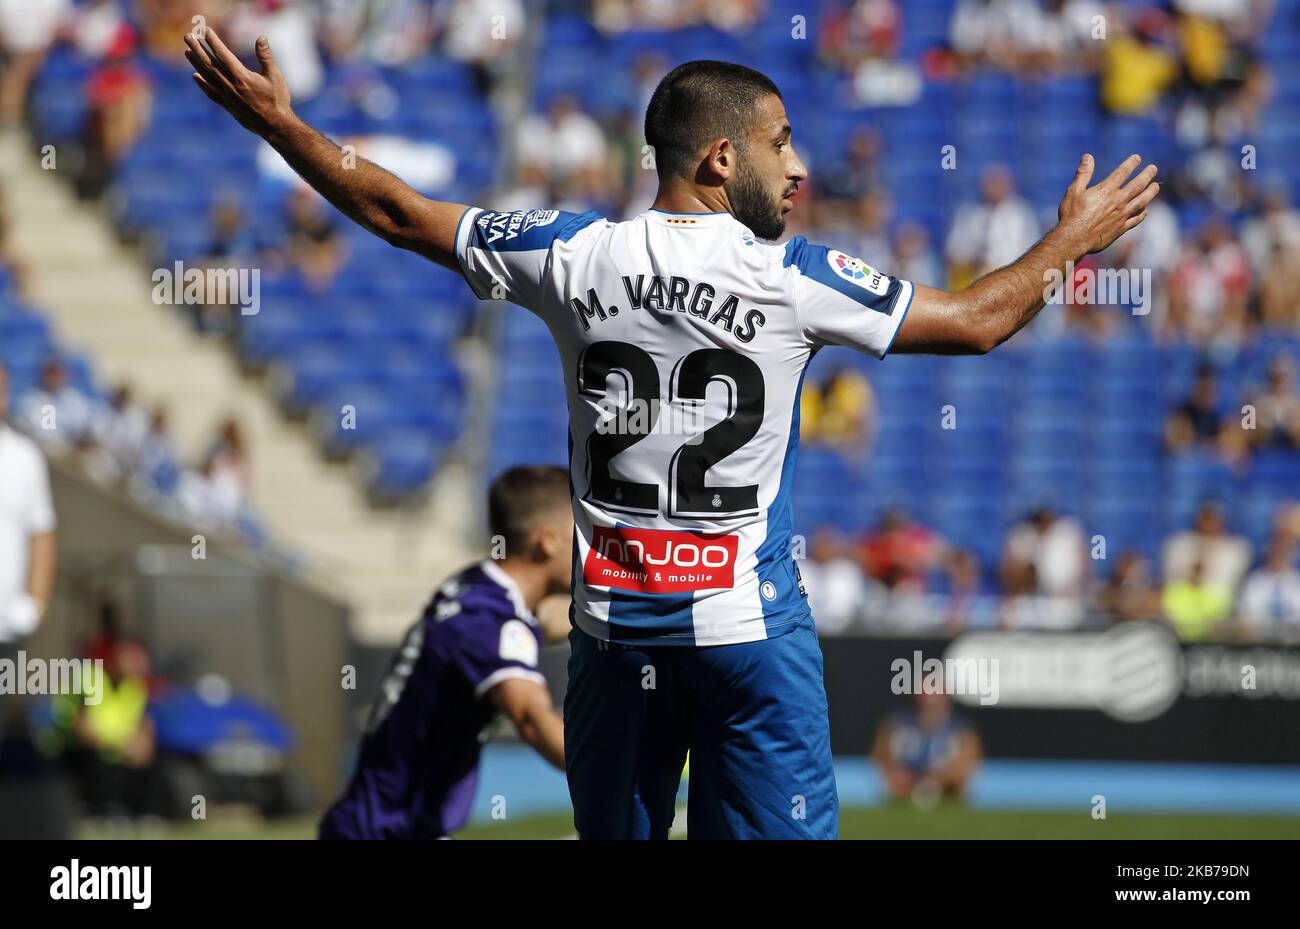 Matias Vargas during the match between RCD Espanyol and Valladolid CF, corresponding to the week 7 of the spanish Liga Santander, played at the RCDE Stadium, on 29th September 2019, in Barcelona, Spain. -- (Photo by Urbanandsport/NurPhoto) Stock Photo